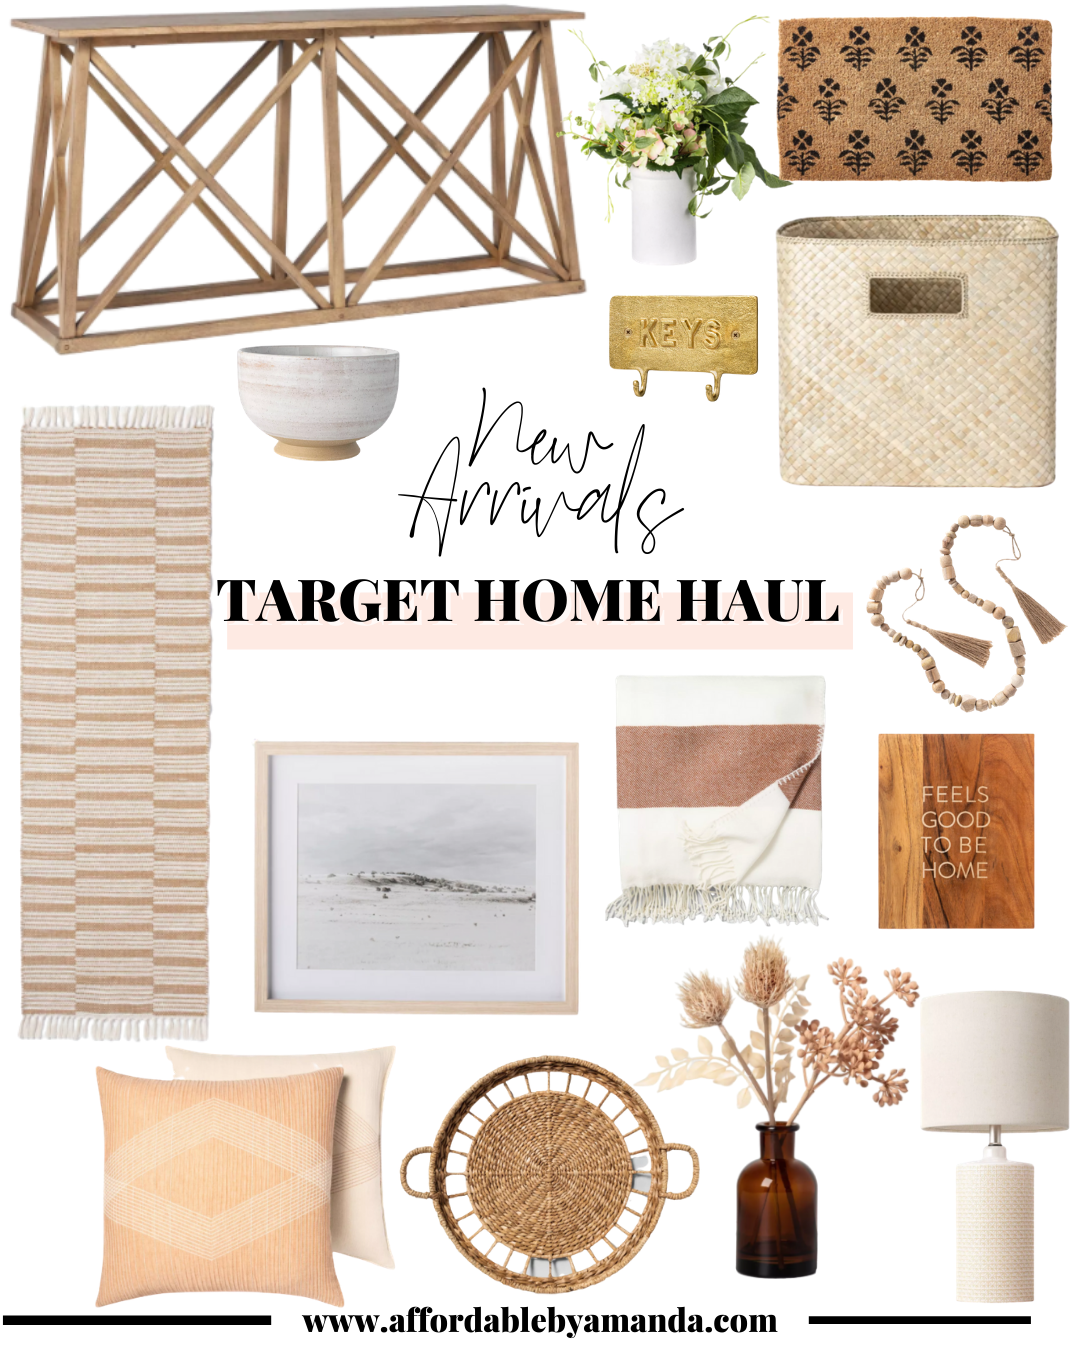 Target Home Decor | Target Home Decor Ideas | Fall 2020 Home Decor Finds at Target